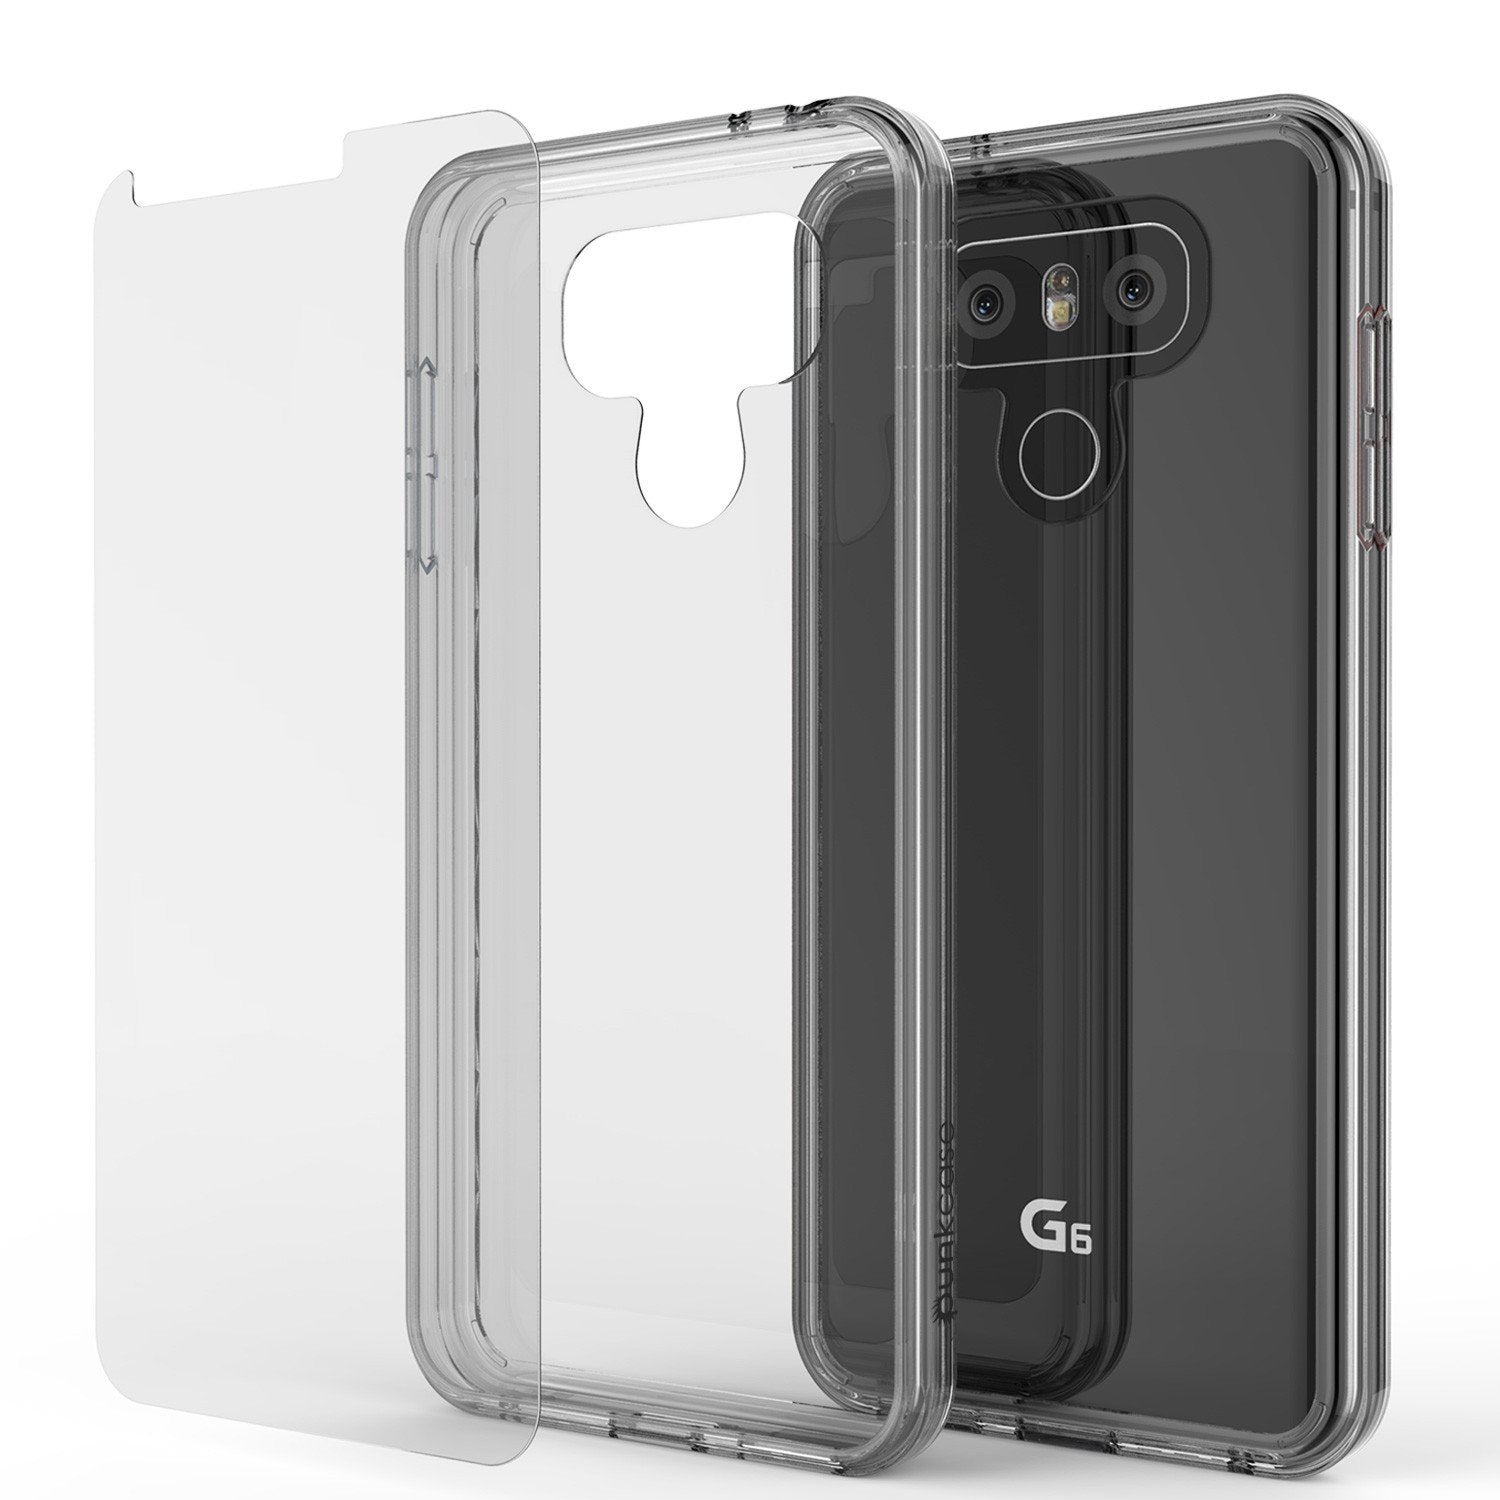 LG G6 Case Punkcase® LUCID 2.0 Clear Series w/ PUNK SHIELD Screen Protector | Ultra Fit